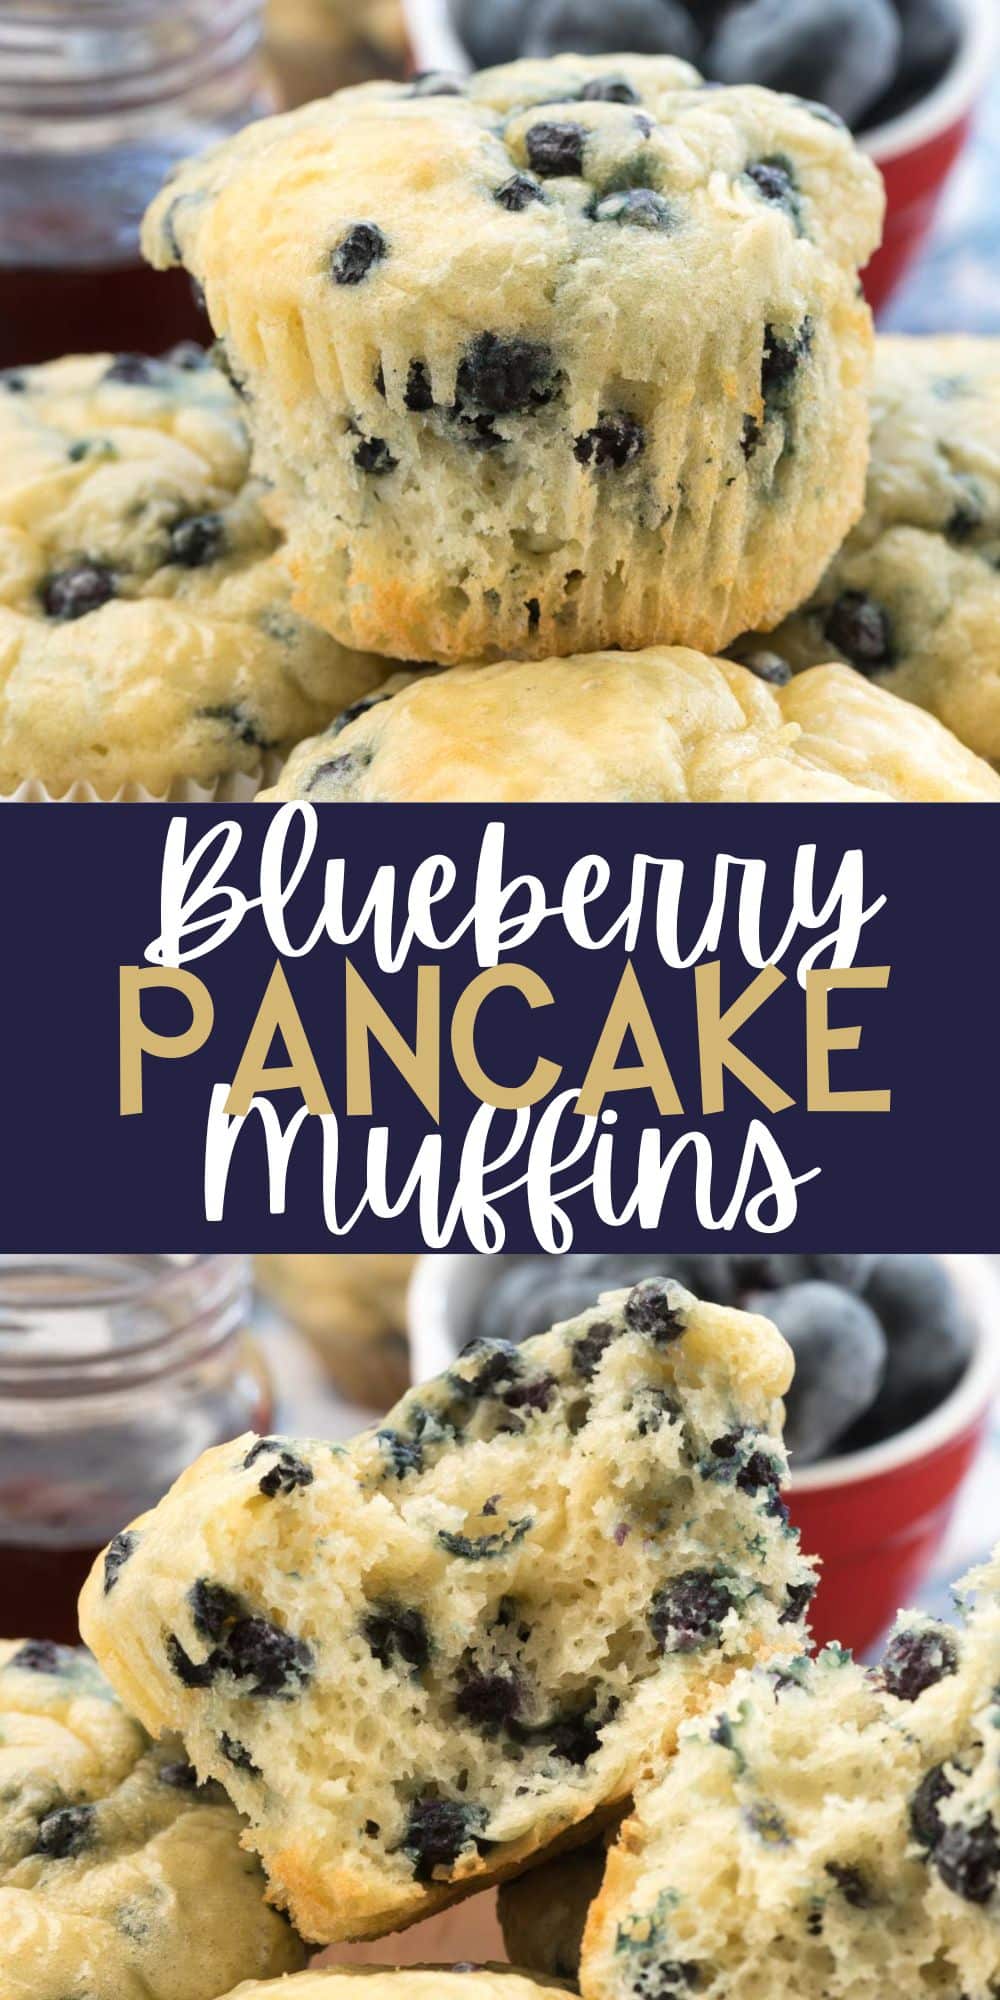 two photos of muffins stacked on other muffins with blueberries baked in with words on the image.